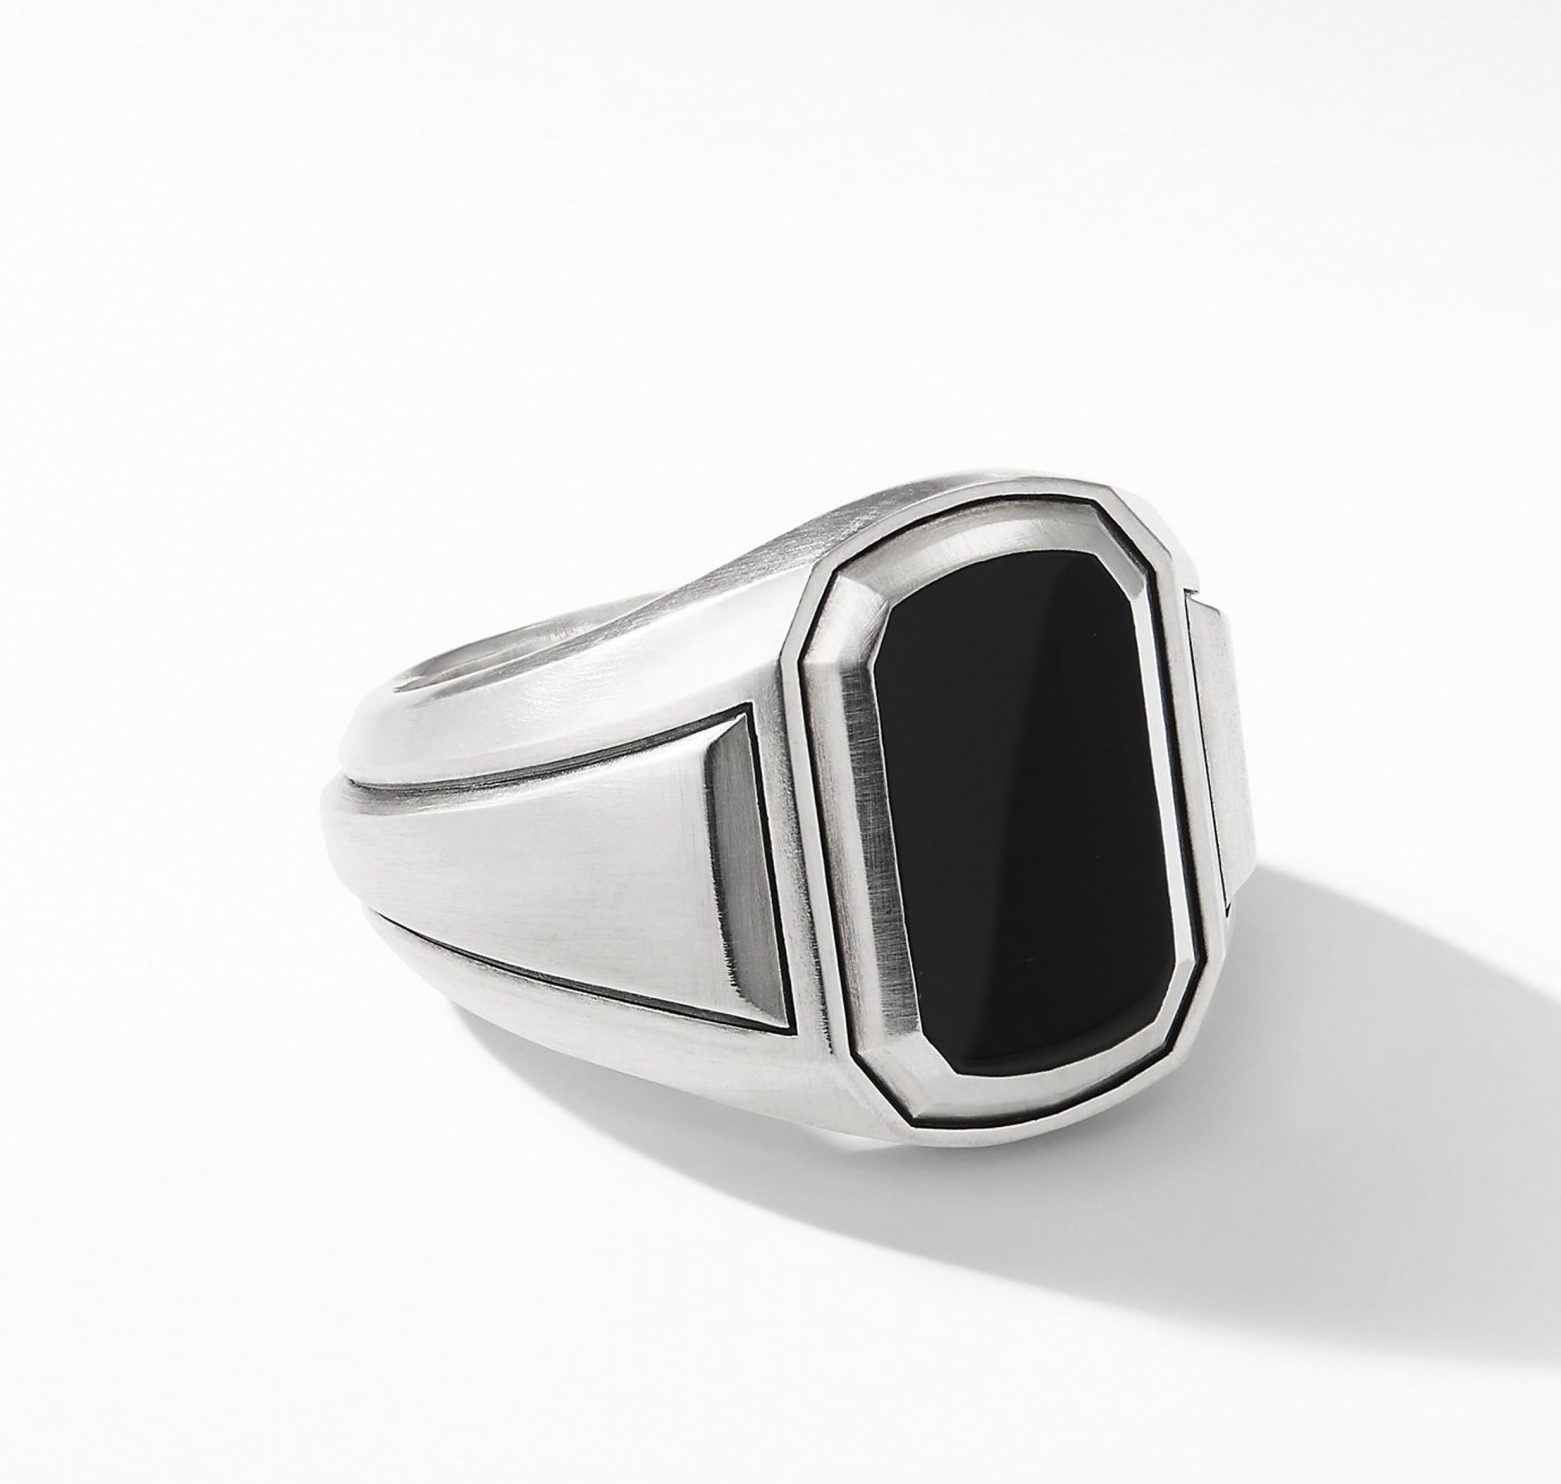 11 Awesome Insignia Rings for Men · Cladright